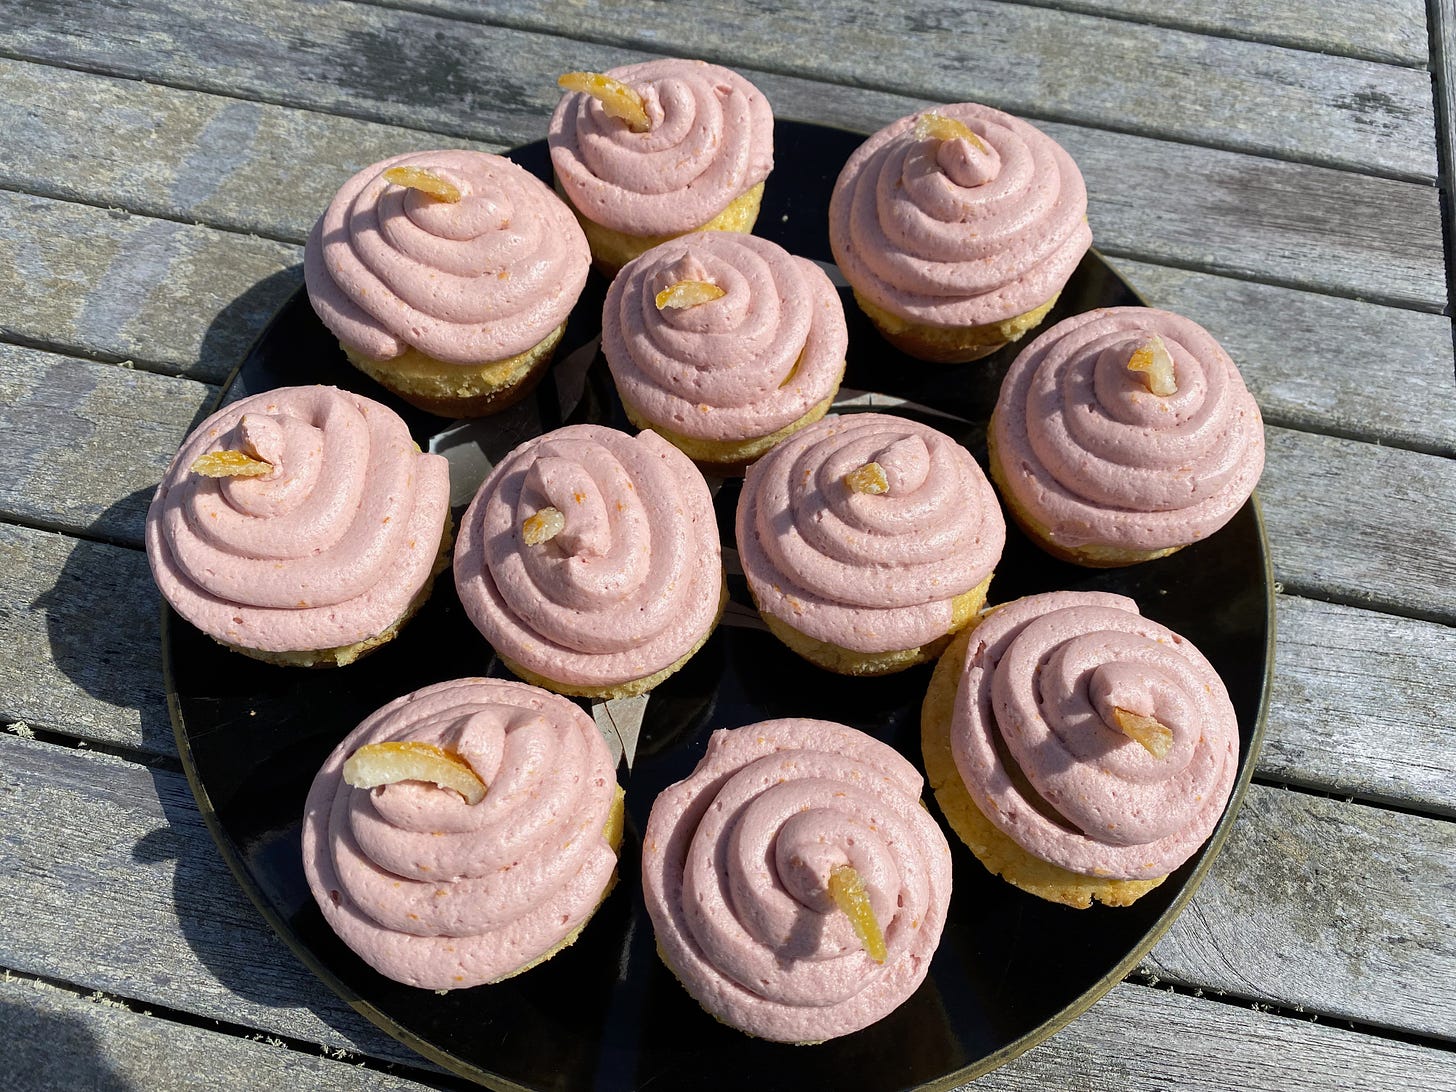 A plate of cupcakes on a wooden picnic table. They are frosted with pink buttercream pipped in a spiral pattern, and each one is topped with a small piece of candied lemon.